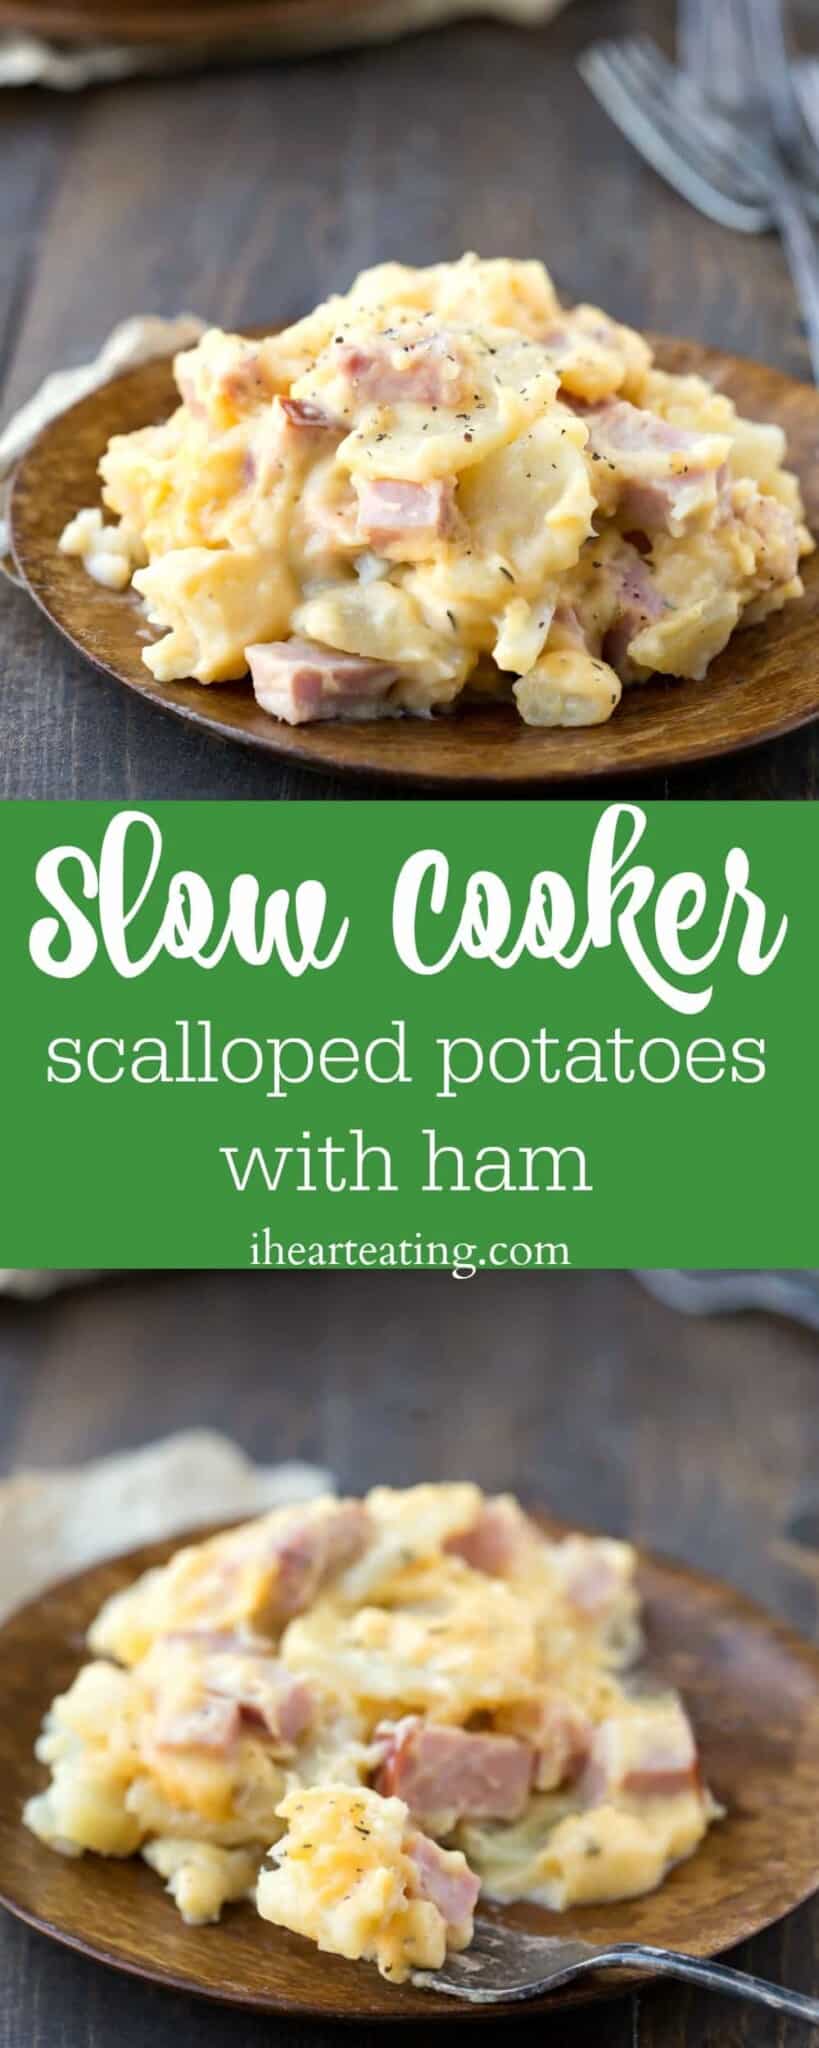 Slow Cooker Scalloped Potatoes with Ham - I Heart Eating